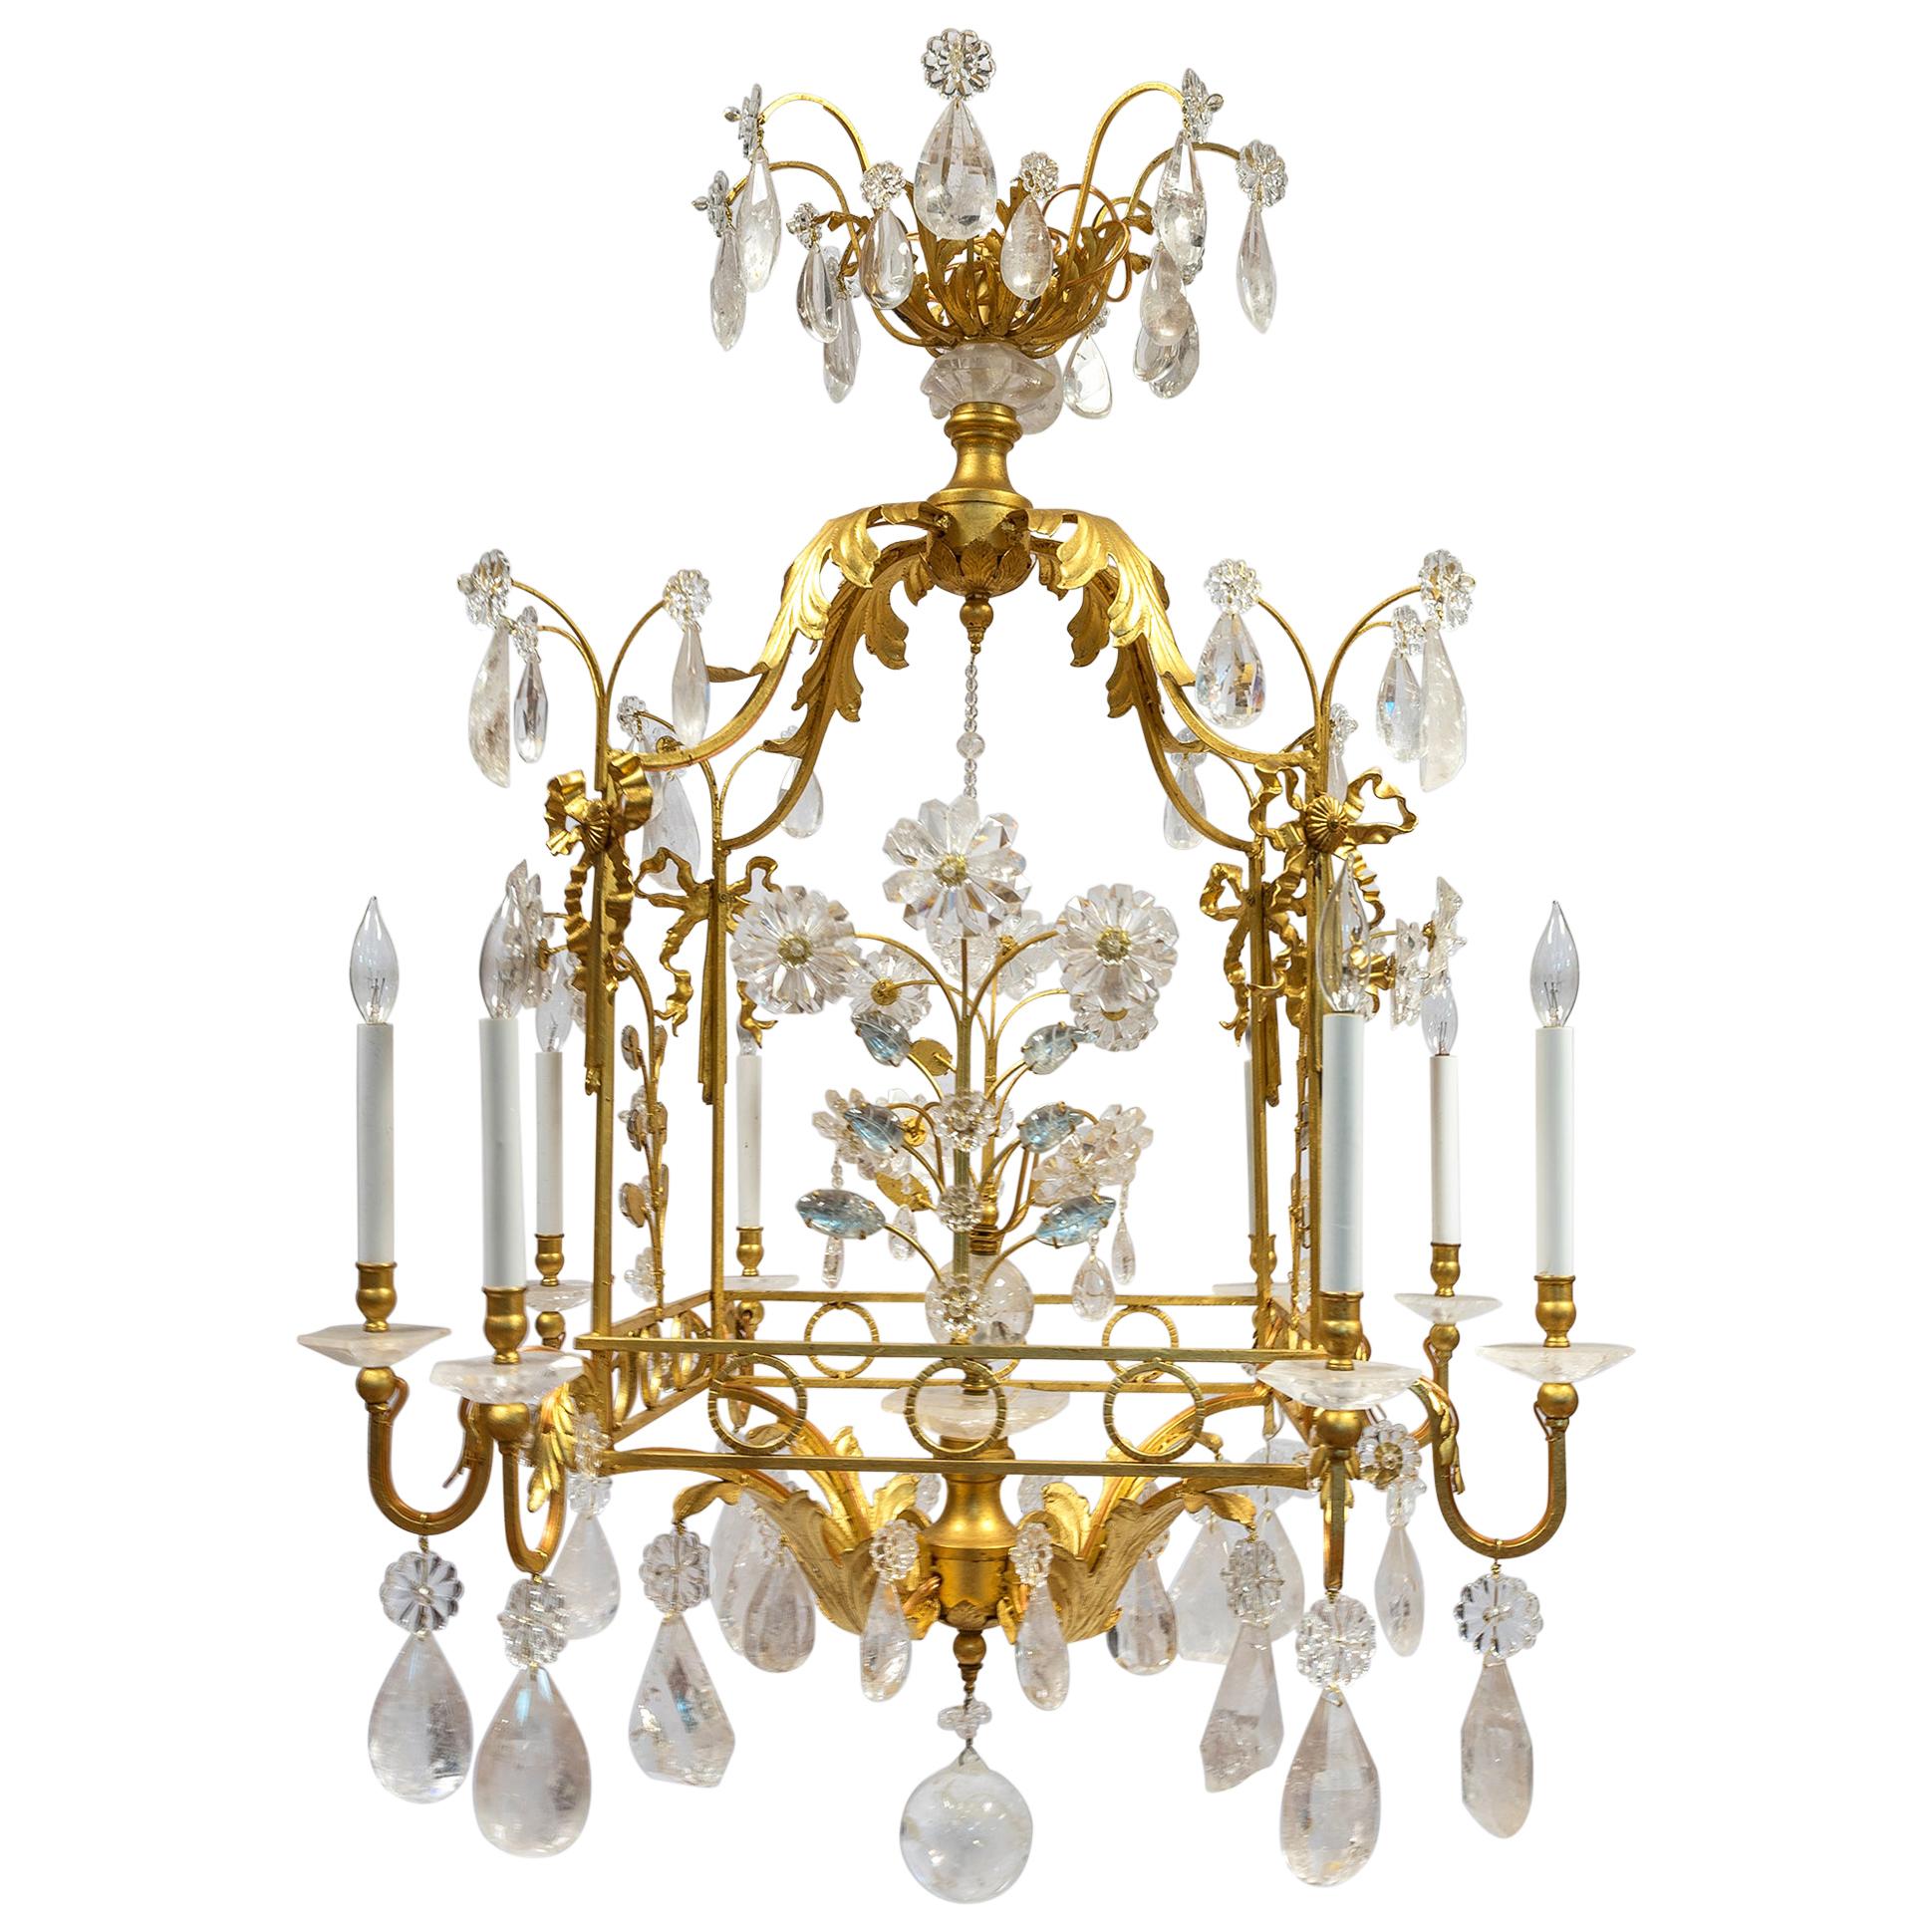 Early 20th Century Charming Rock Crystal Cage-Formed Chandelier